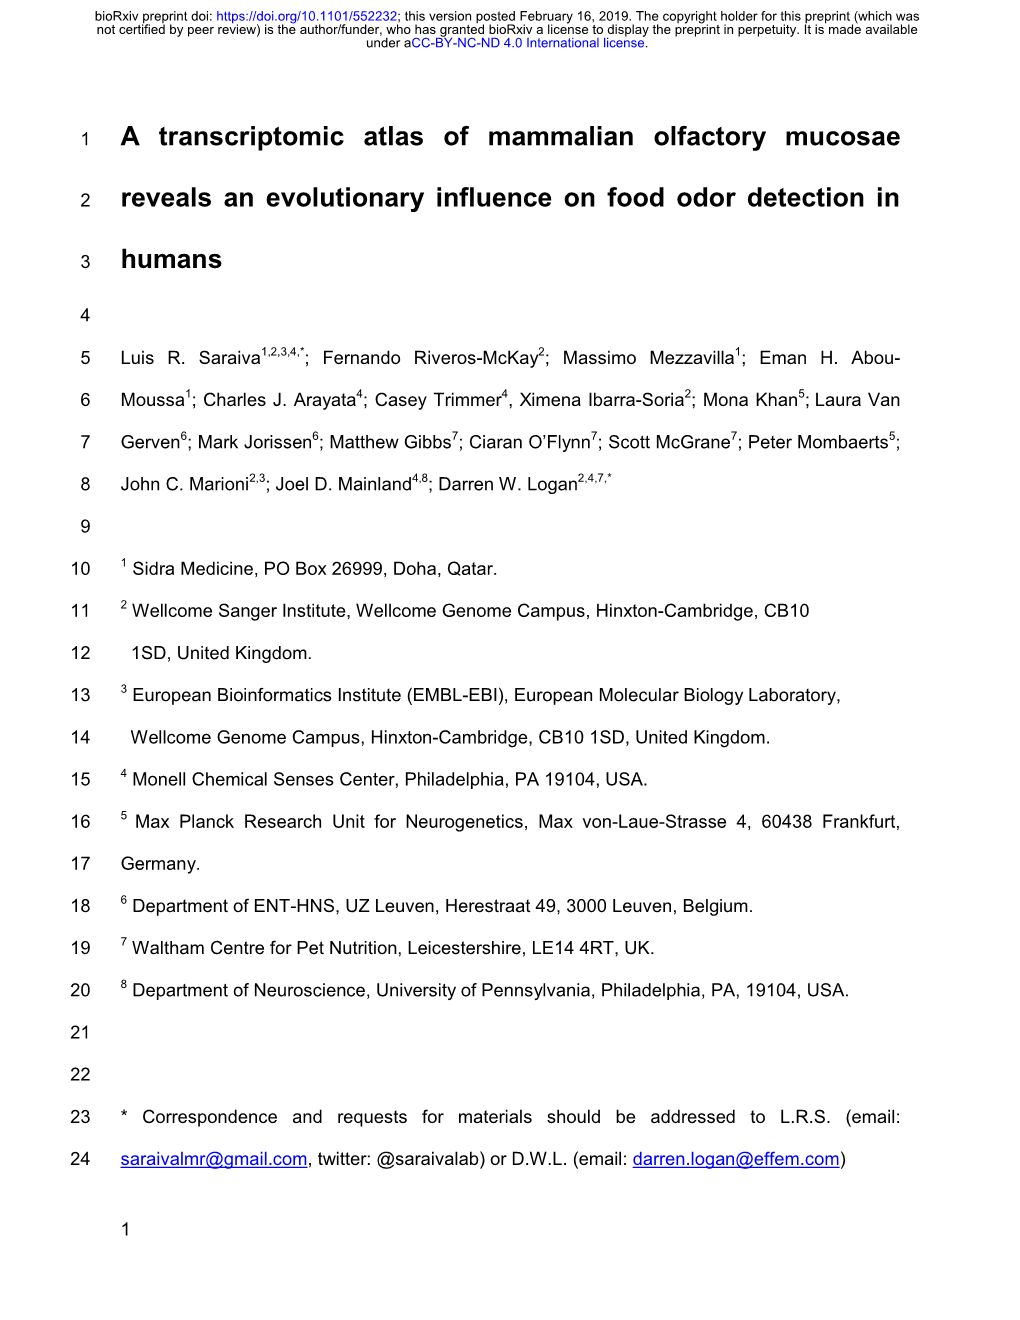 A Transcriptomic Atlas of Mammalian Olfactory Mucosae Reveals an Evolutionary Influence on Food Odor Detection in Humans